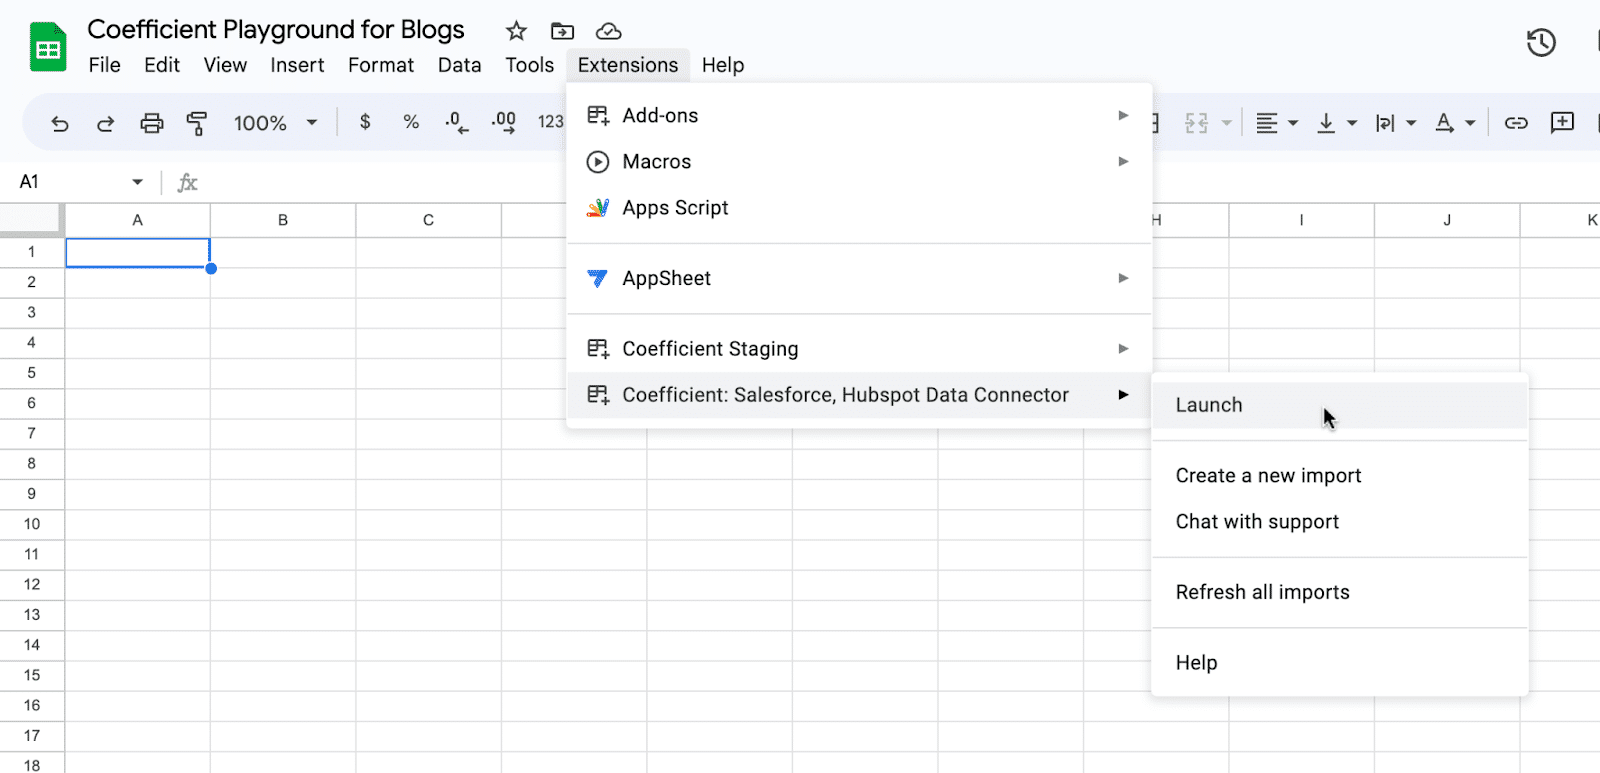 Launching Coefficient from Extensions > Coefficient > Launch in Google Sheets.